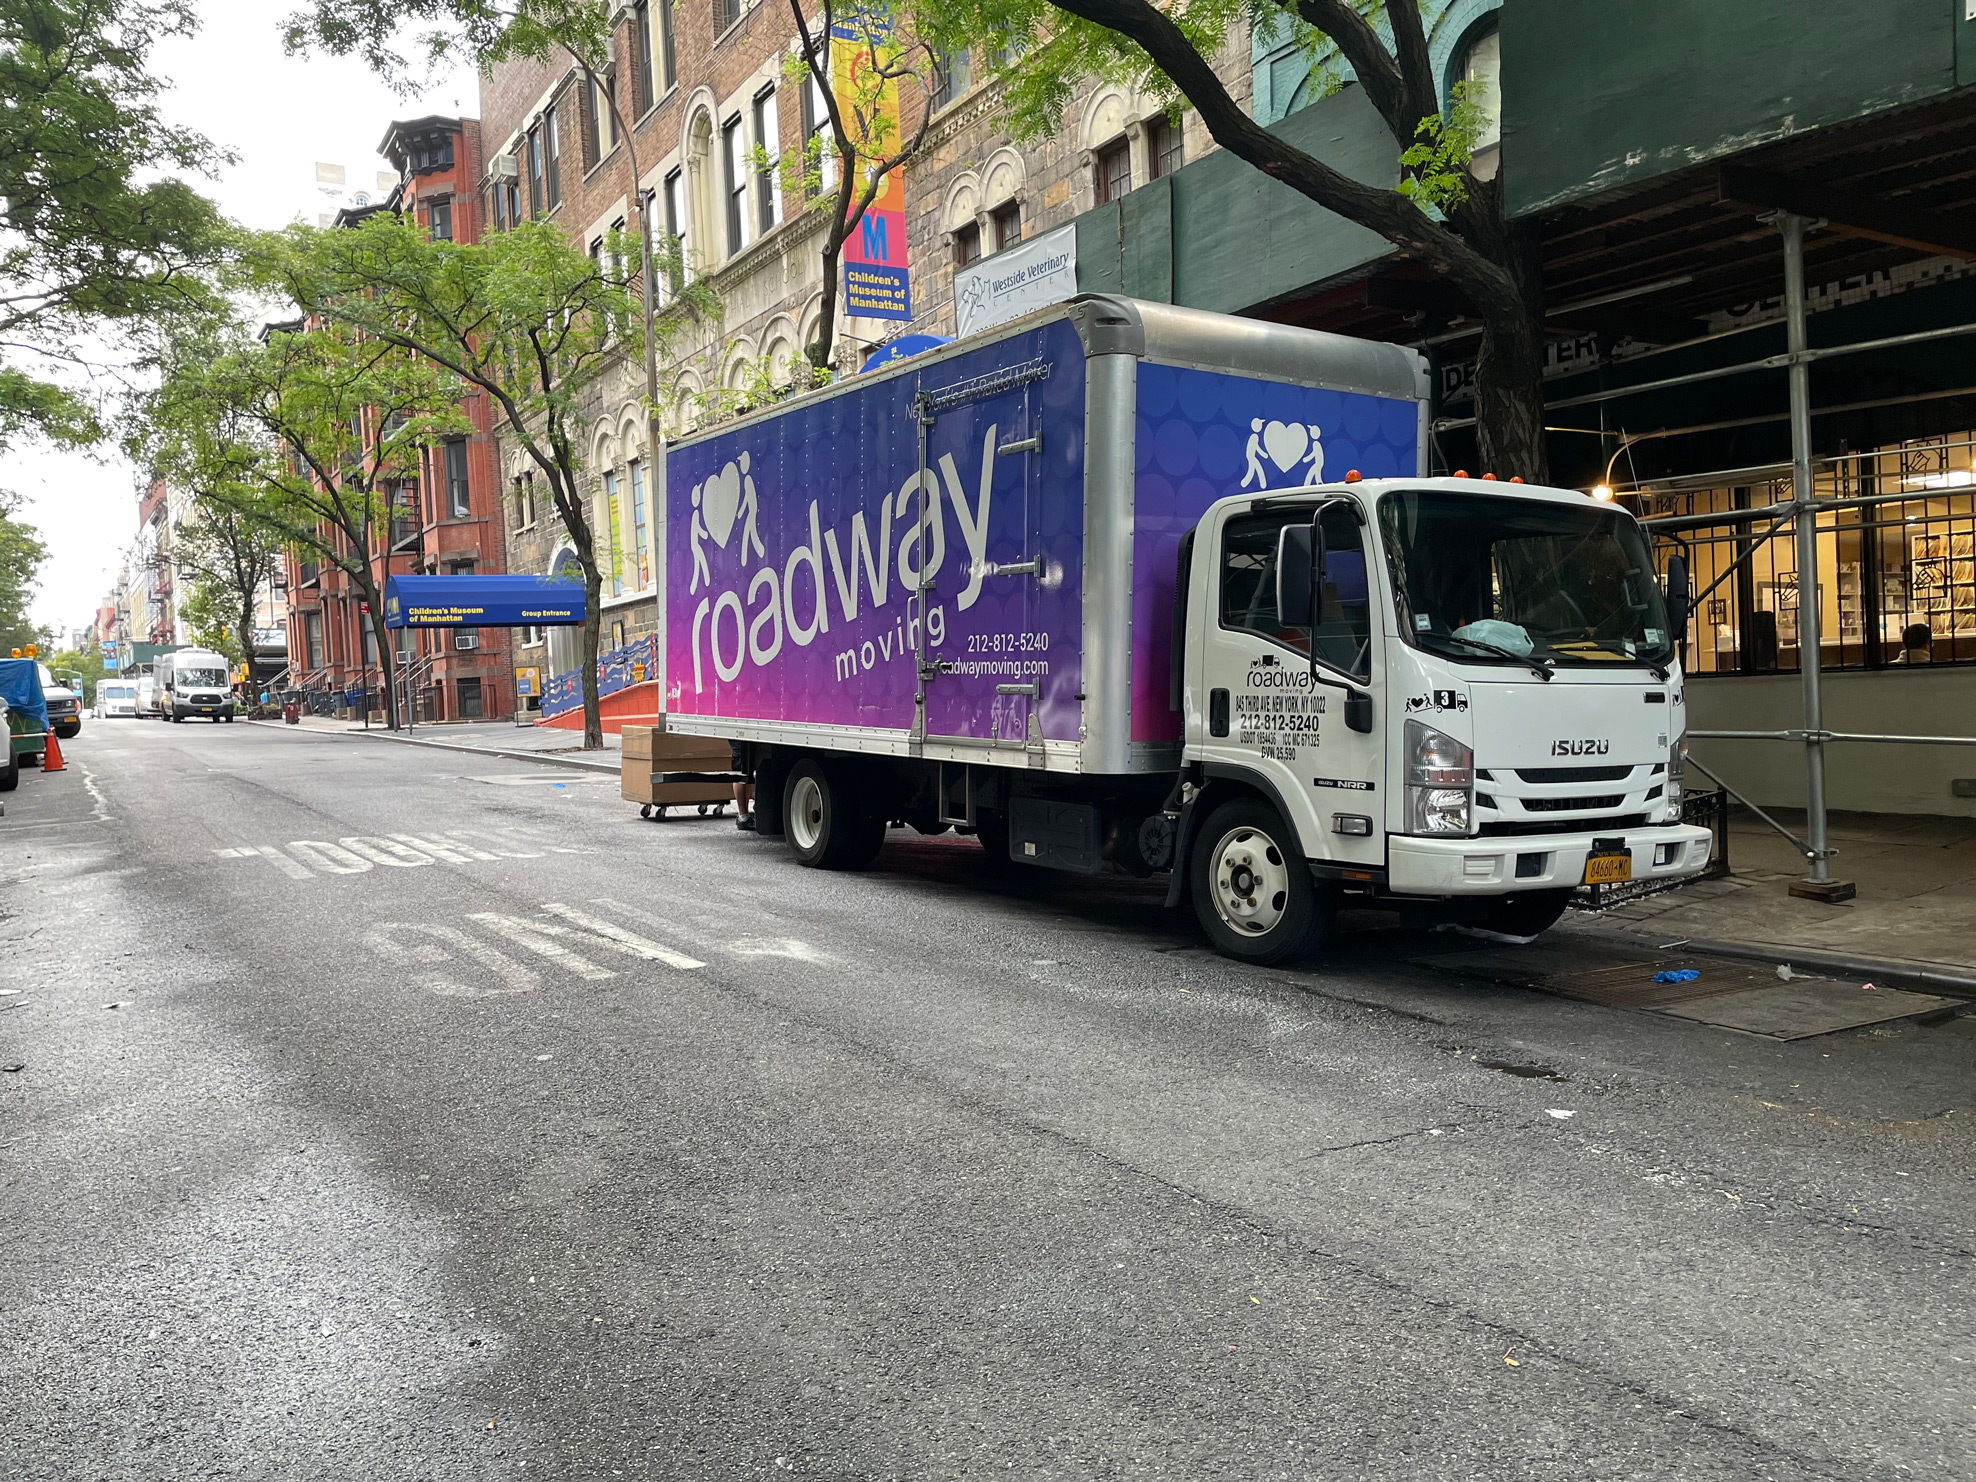 moving to Upper East Side with roadway movers